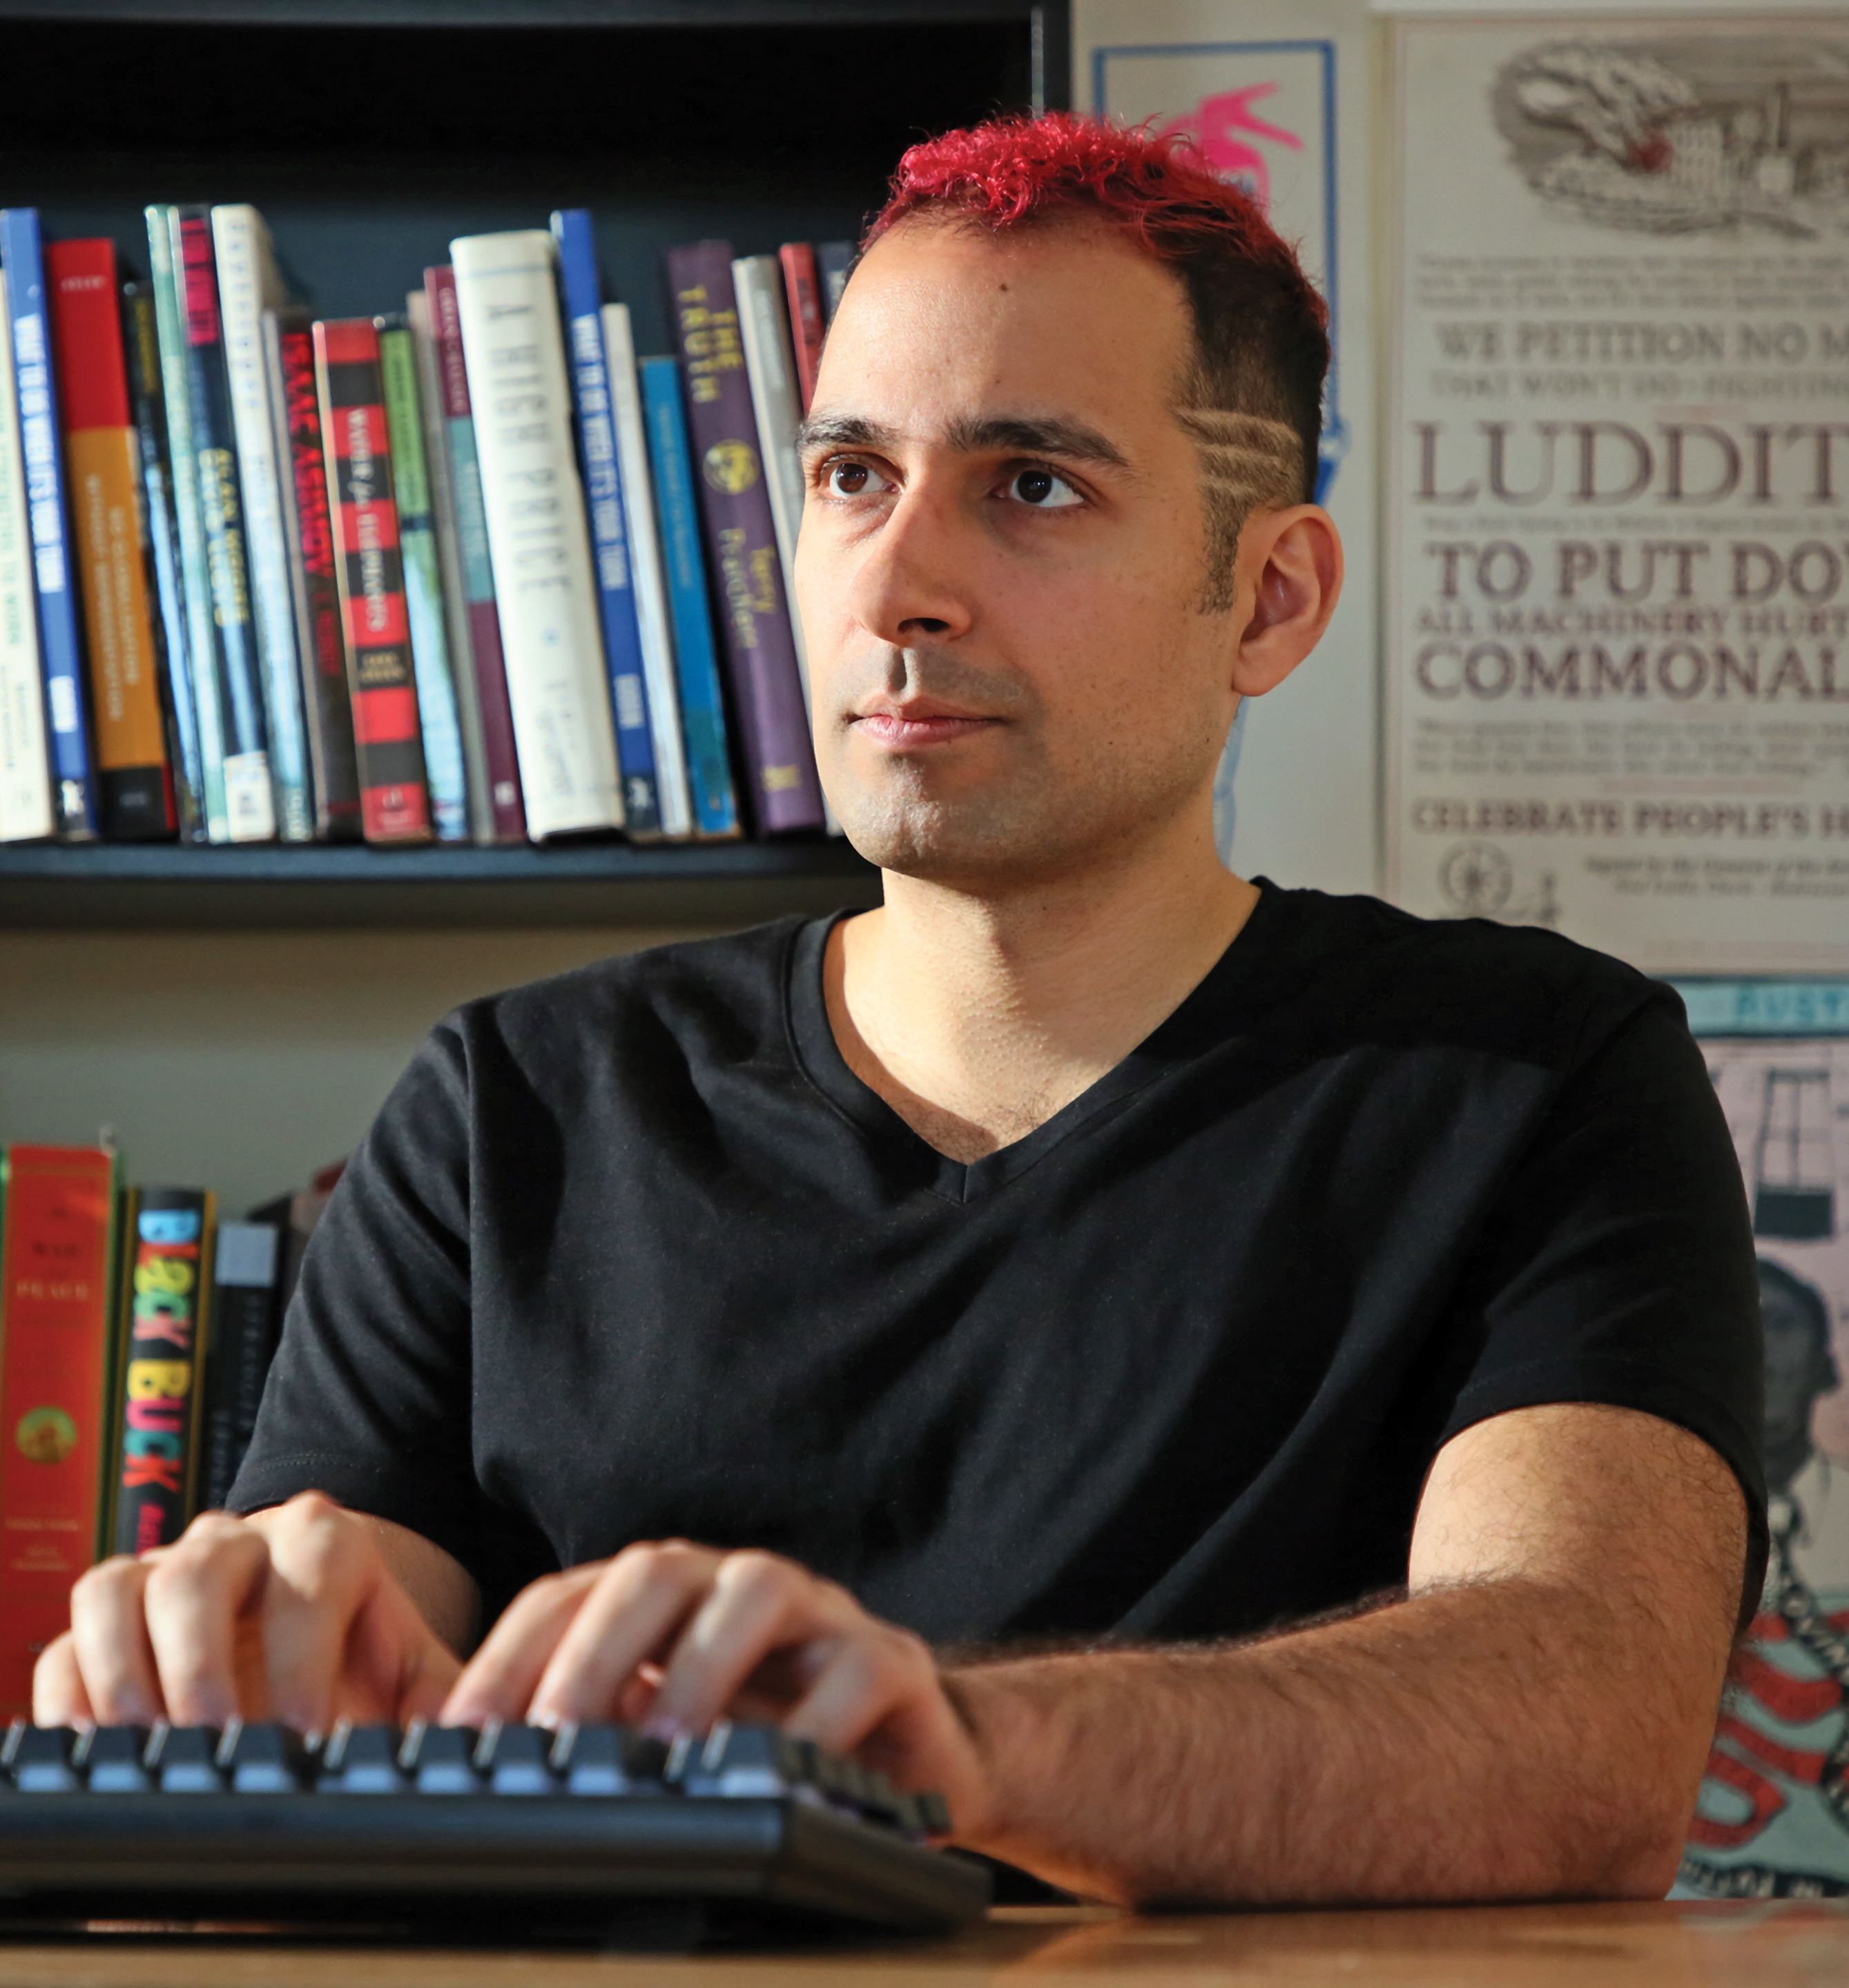 Massachi, wearing a back T-shirt, works at his keyboard with a shelf of books behind him.